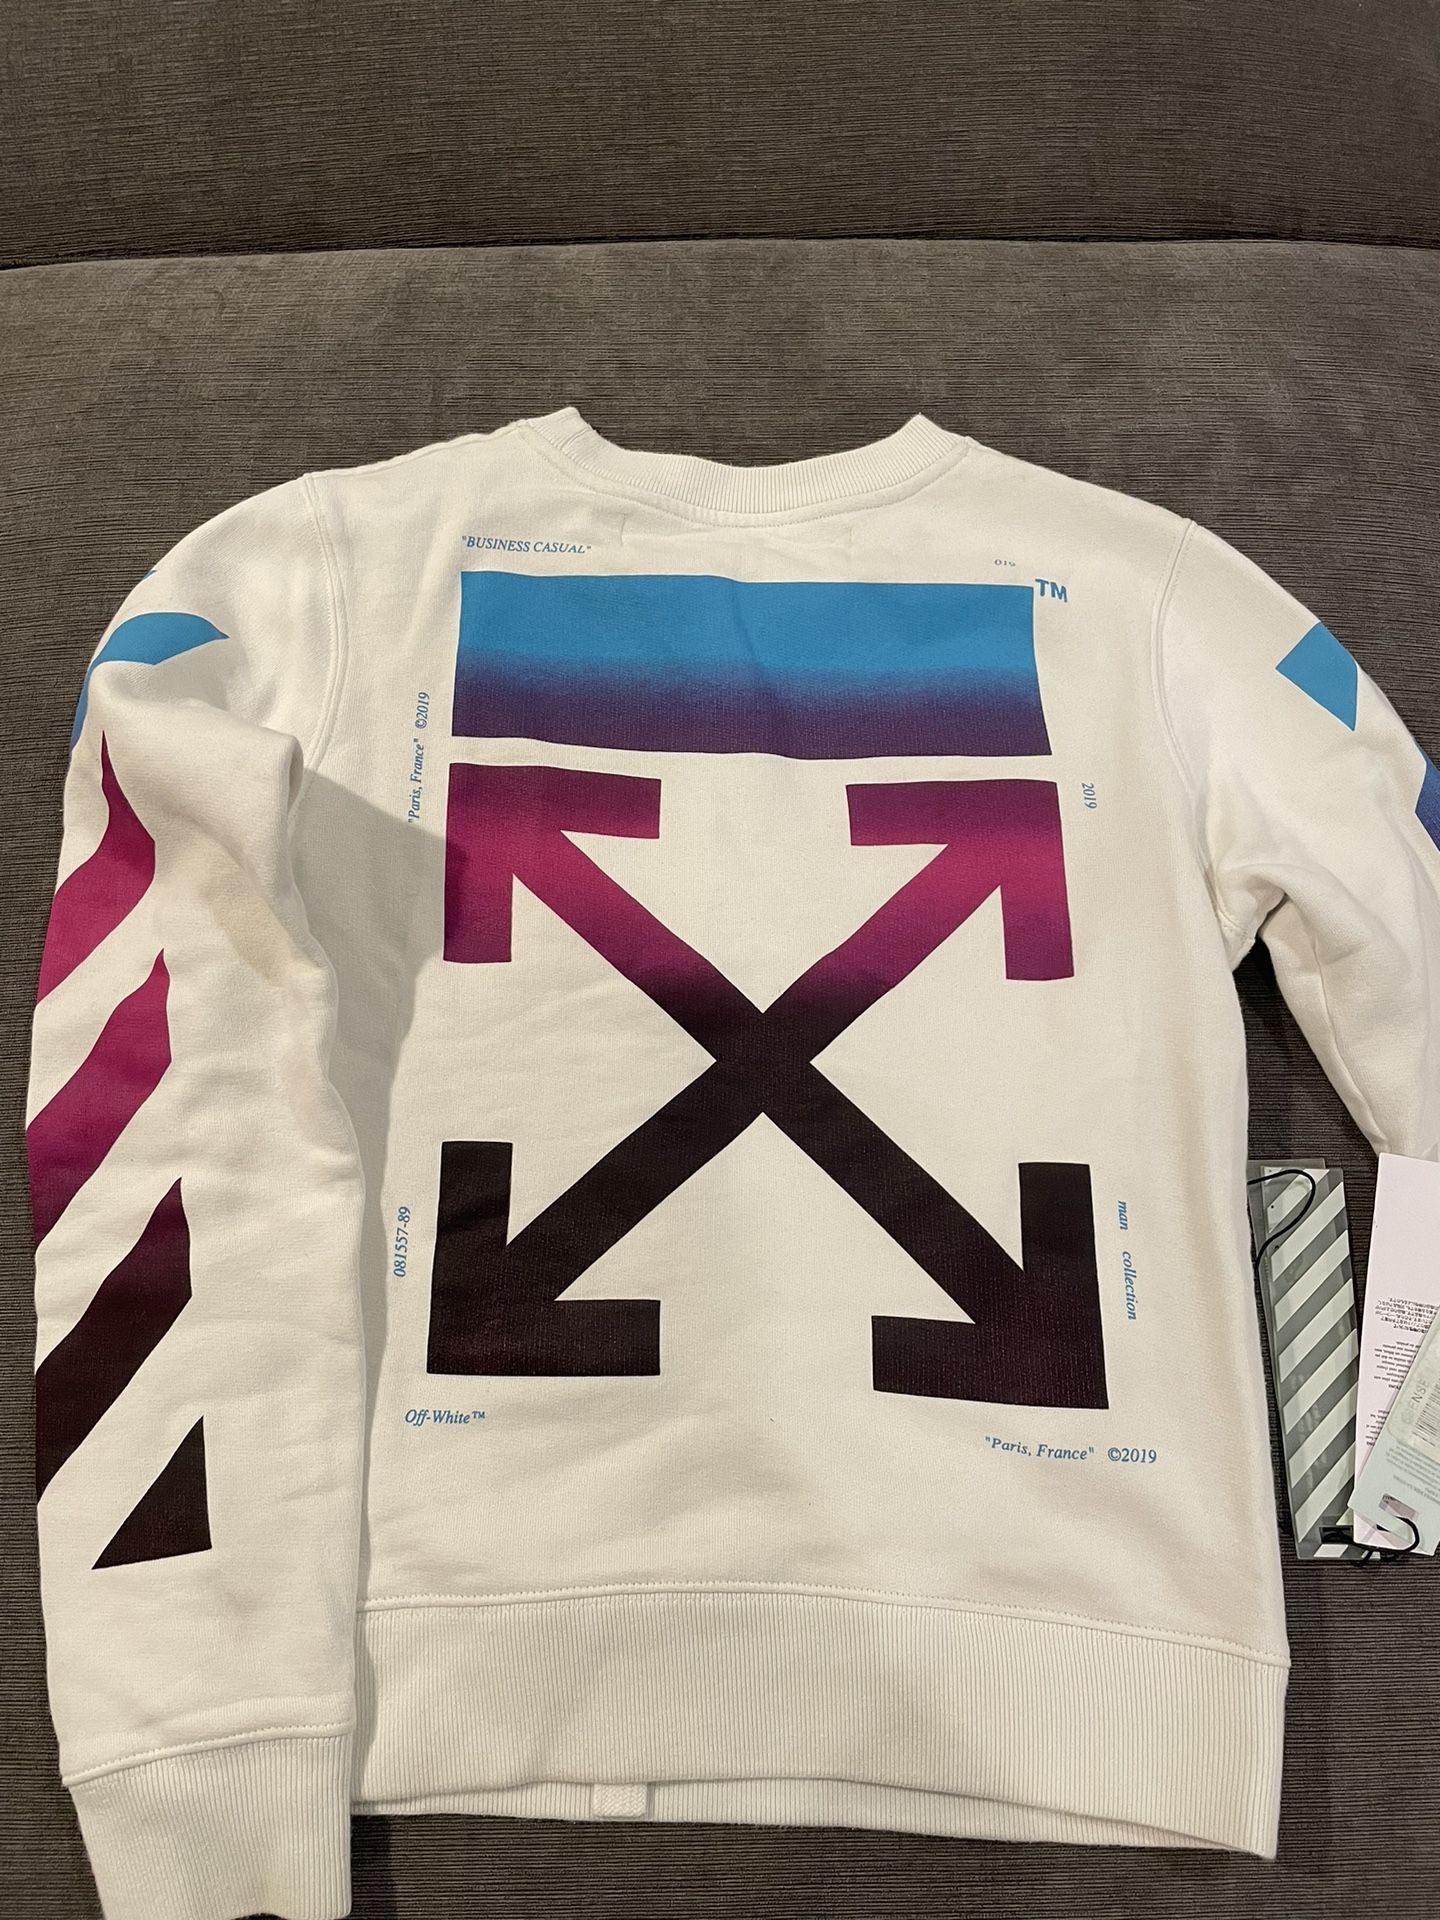 Off-White Diagonal Crewneck Sweatshirt [100% AUTHENTIC] With Tags!! for Sale in Valley Stream, NY - OfferUp